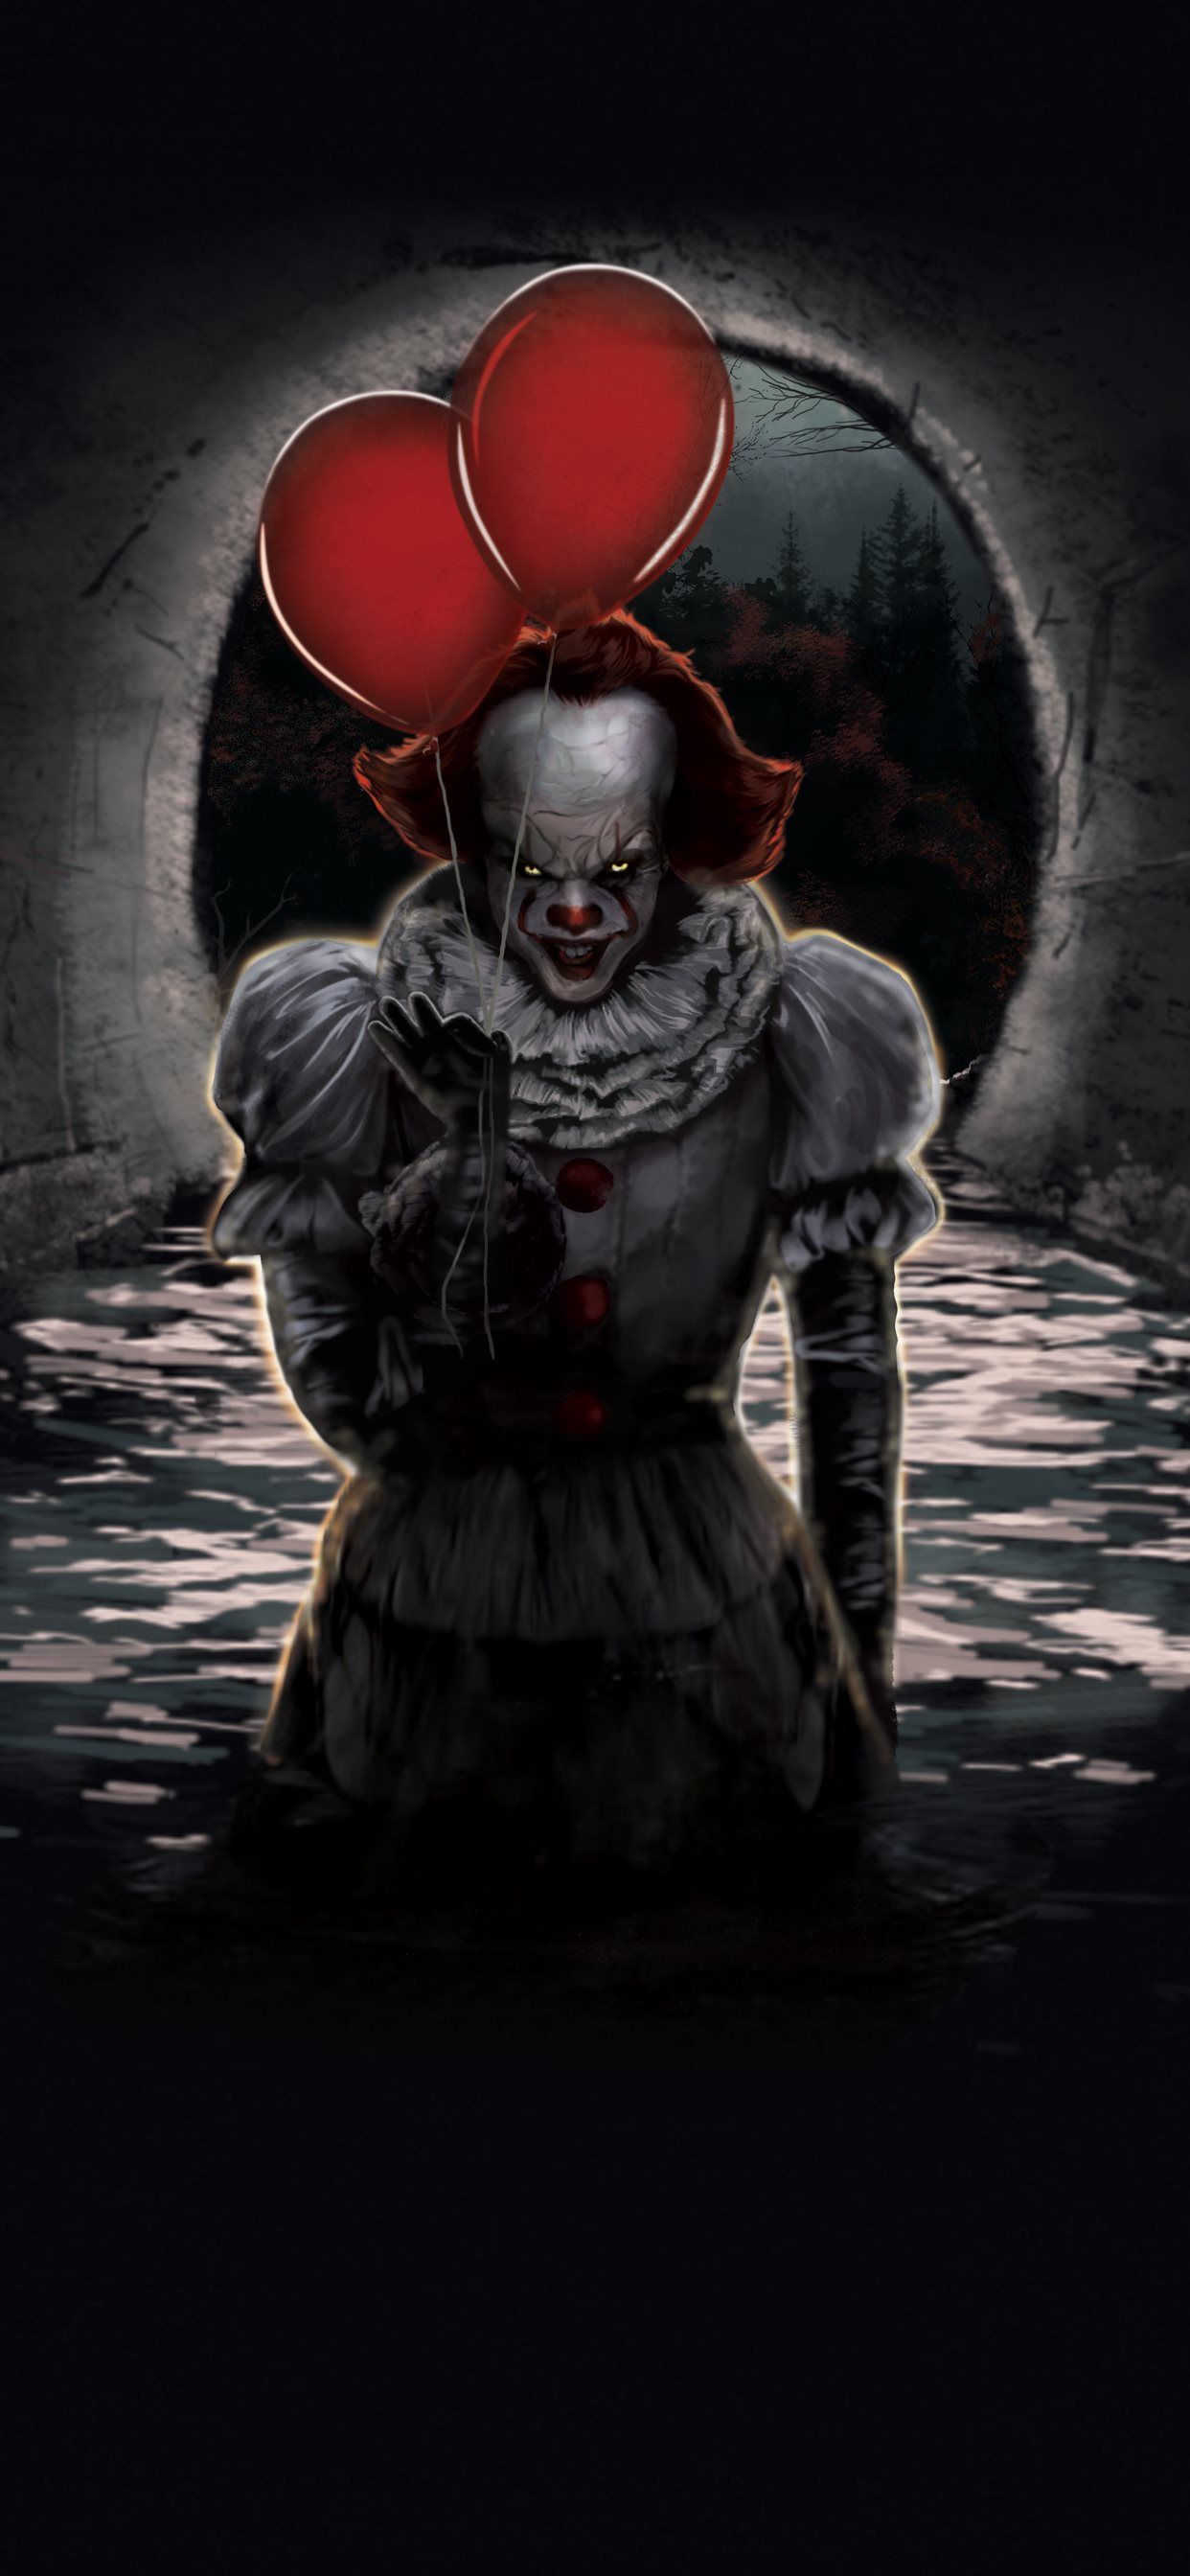 pennywise ballons iPhone Wallpaper Free Download